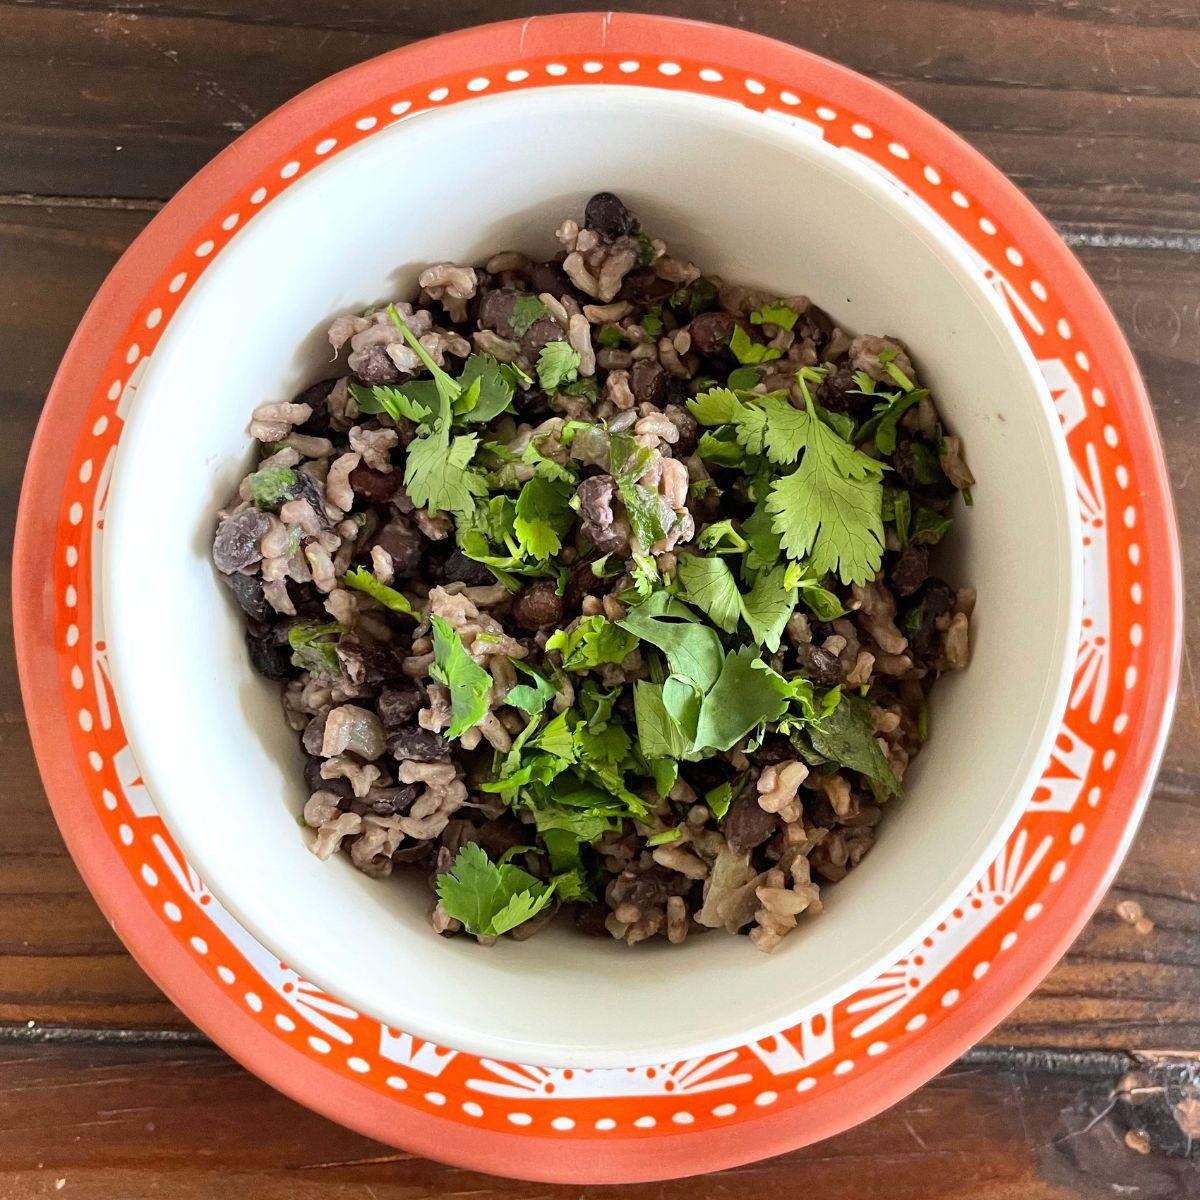 A bowl of black beans and rice on a wooden table.